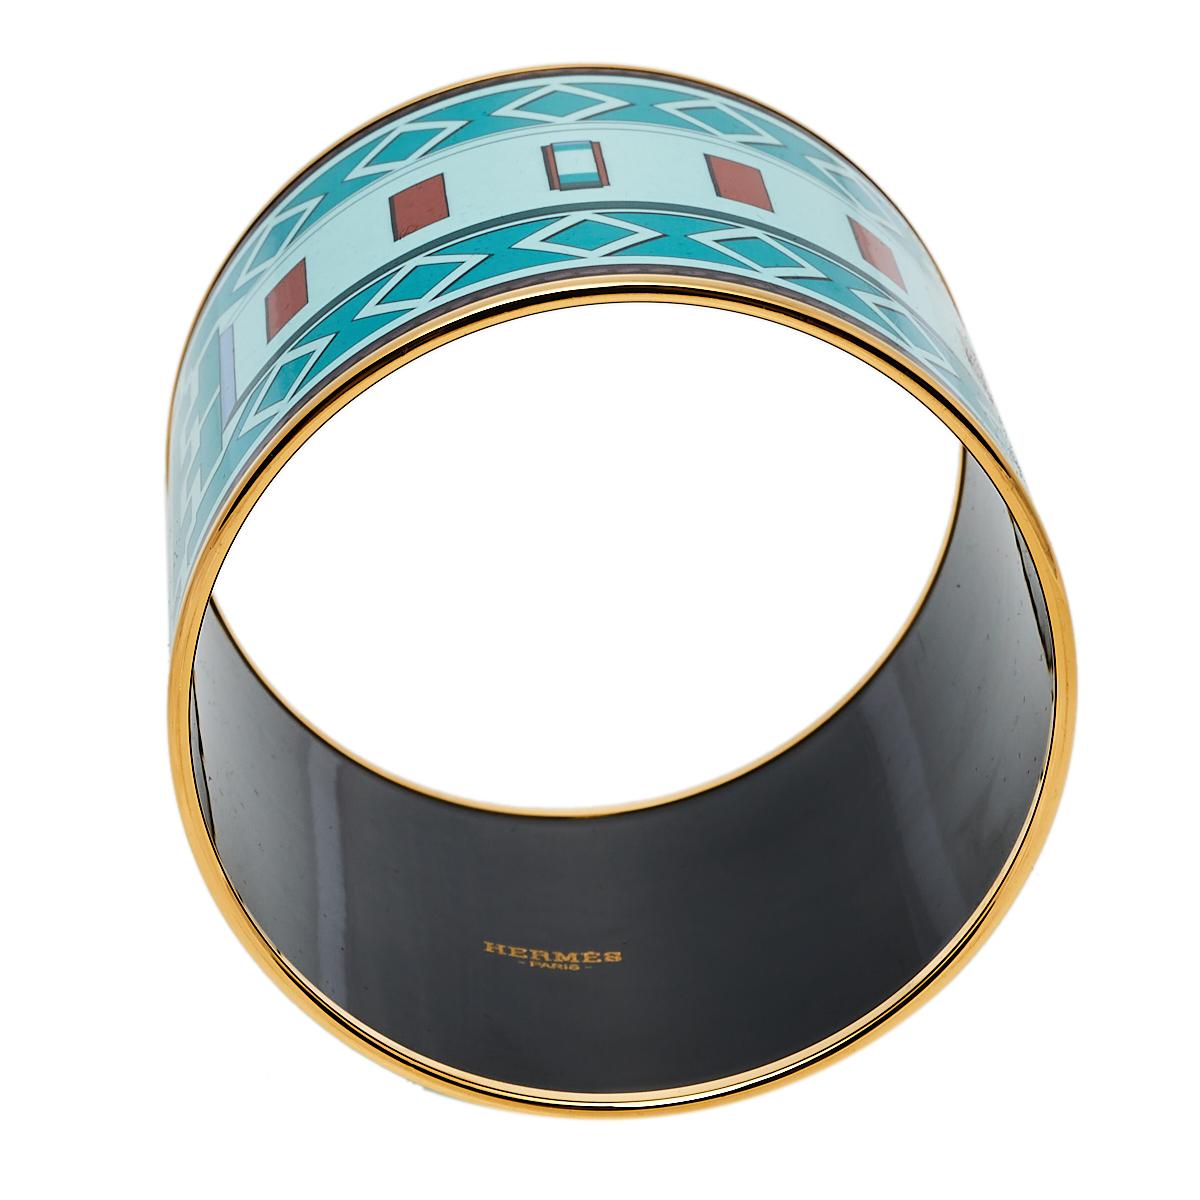 Hermes presents this stylish and chic enamel bracelet. It features a print throughout inspired by the house's iconic Collier De Chien bracelet. Hallmark details on the inside bring this creation to completion.

Includes: Original Dustbag, Original